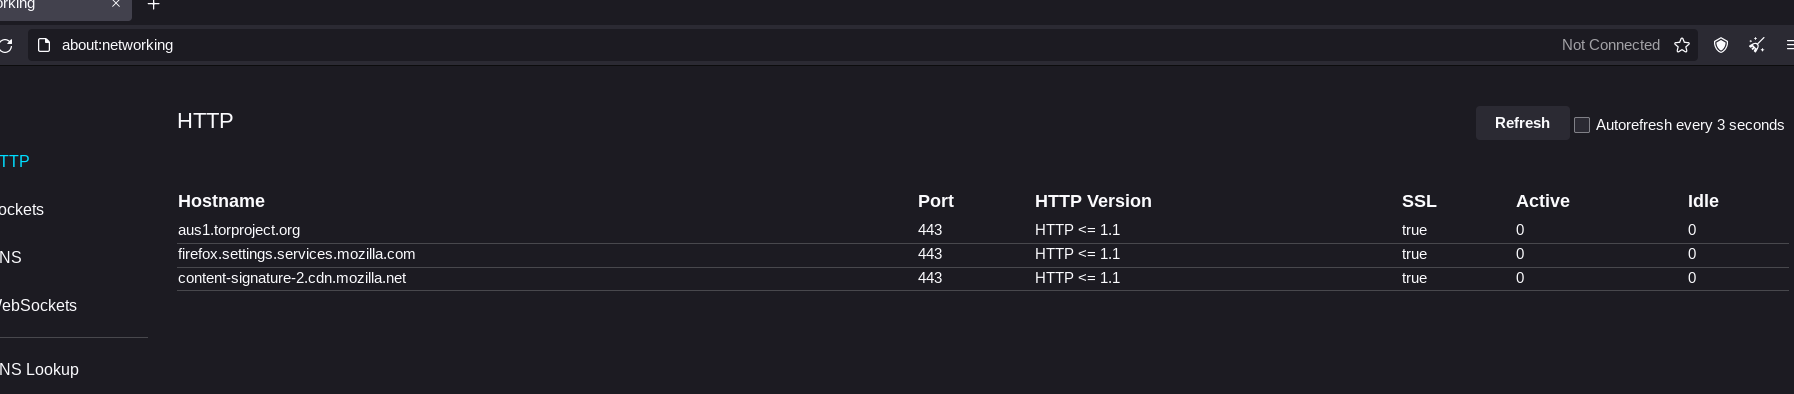 About Networking in Tor Browser, displaying connections prior to connecting with the Tor Network